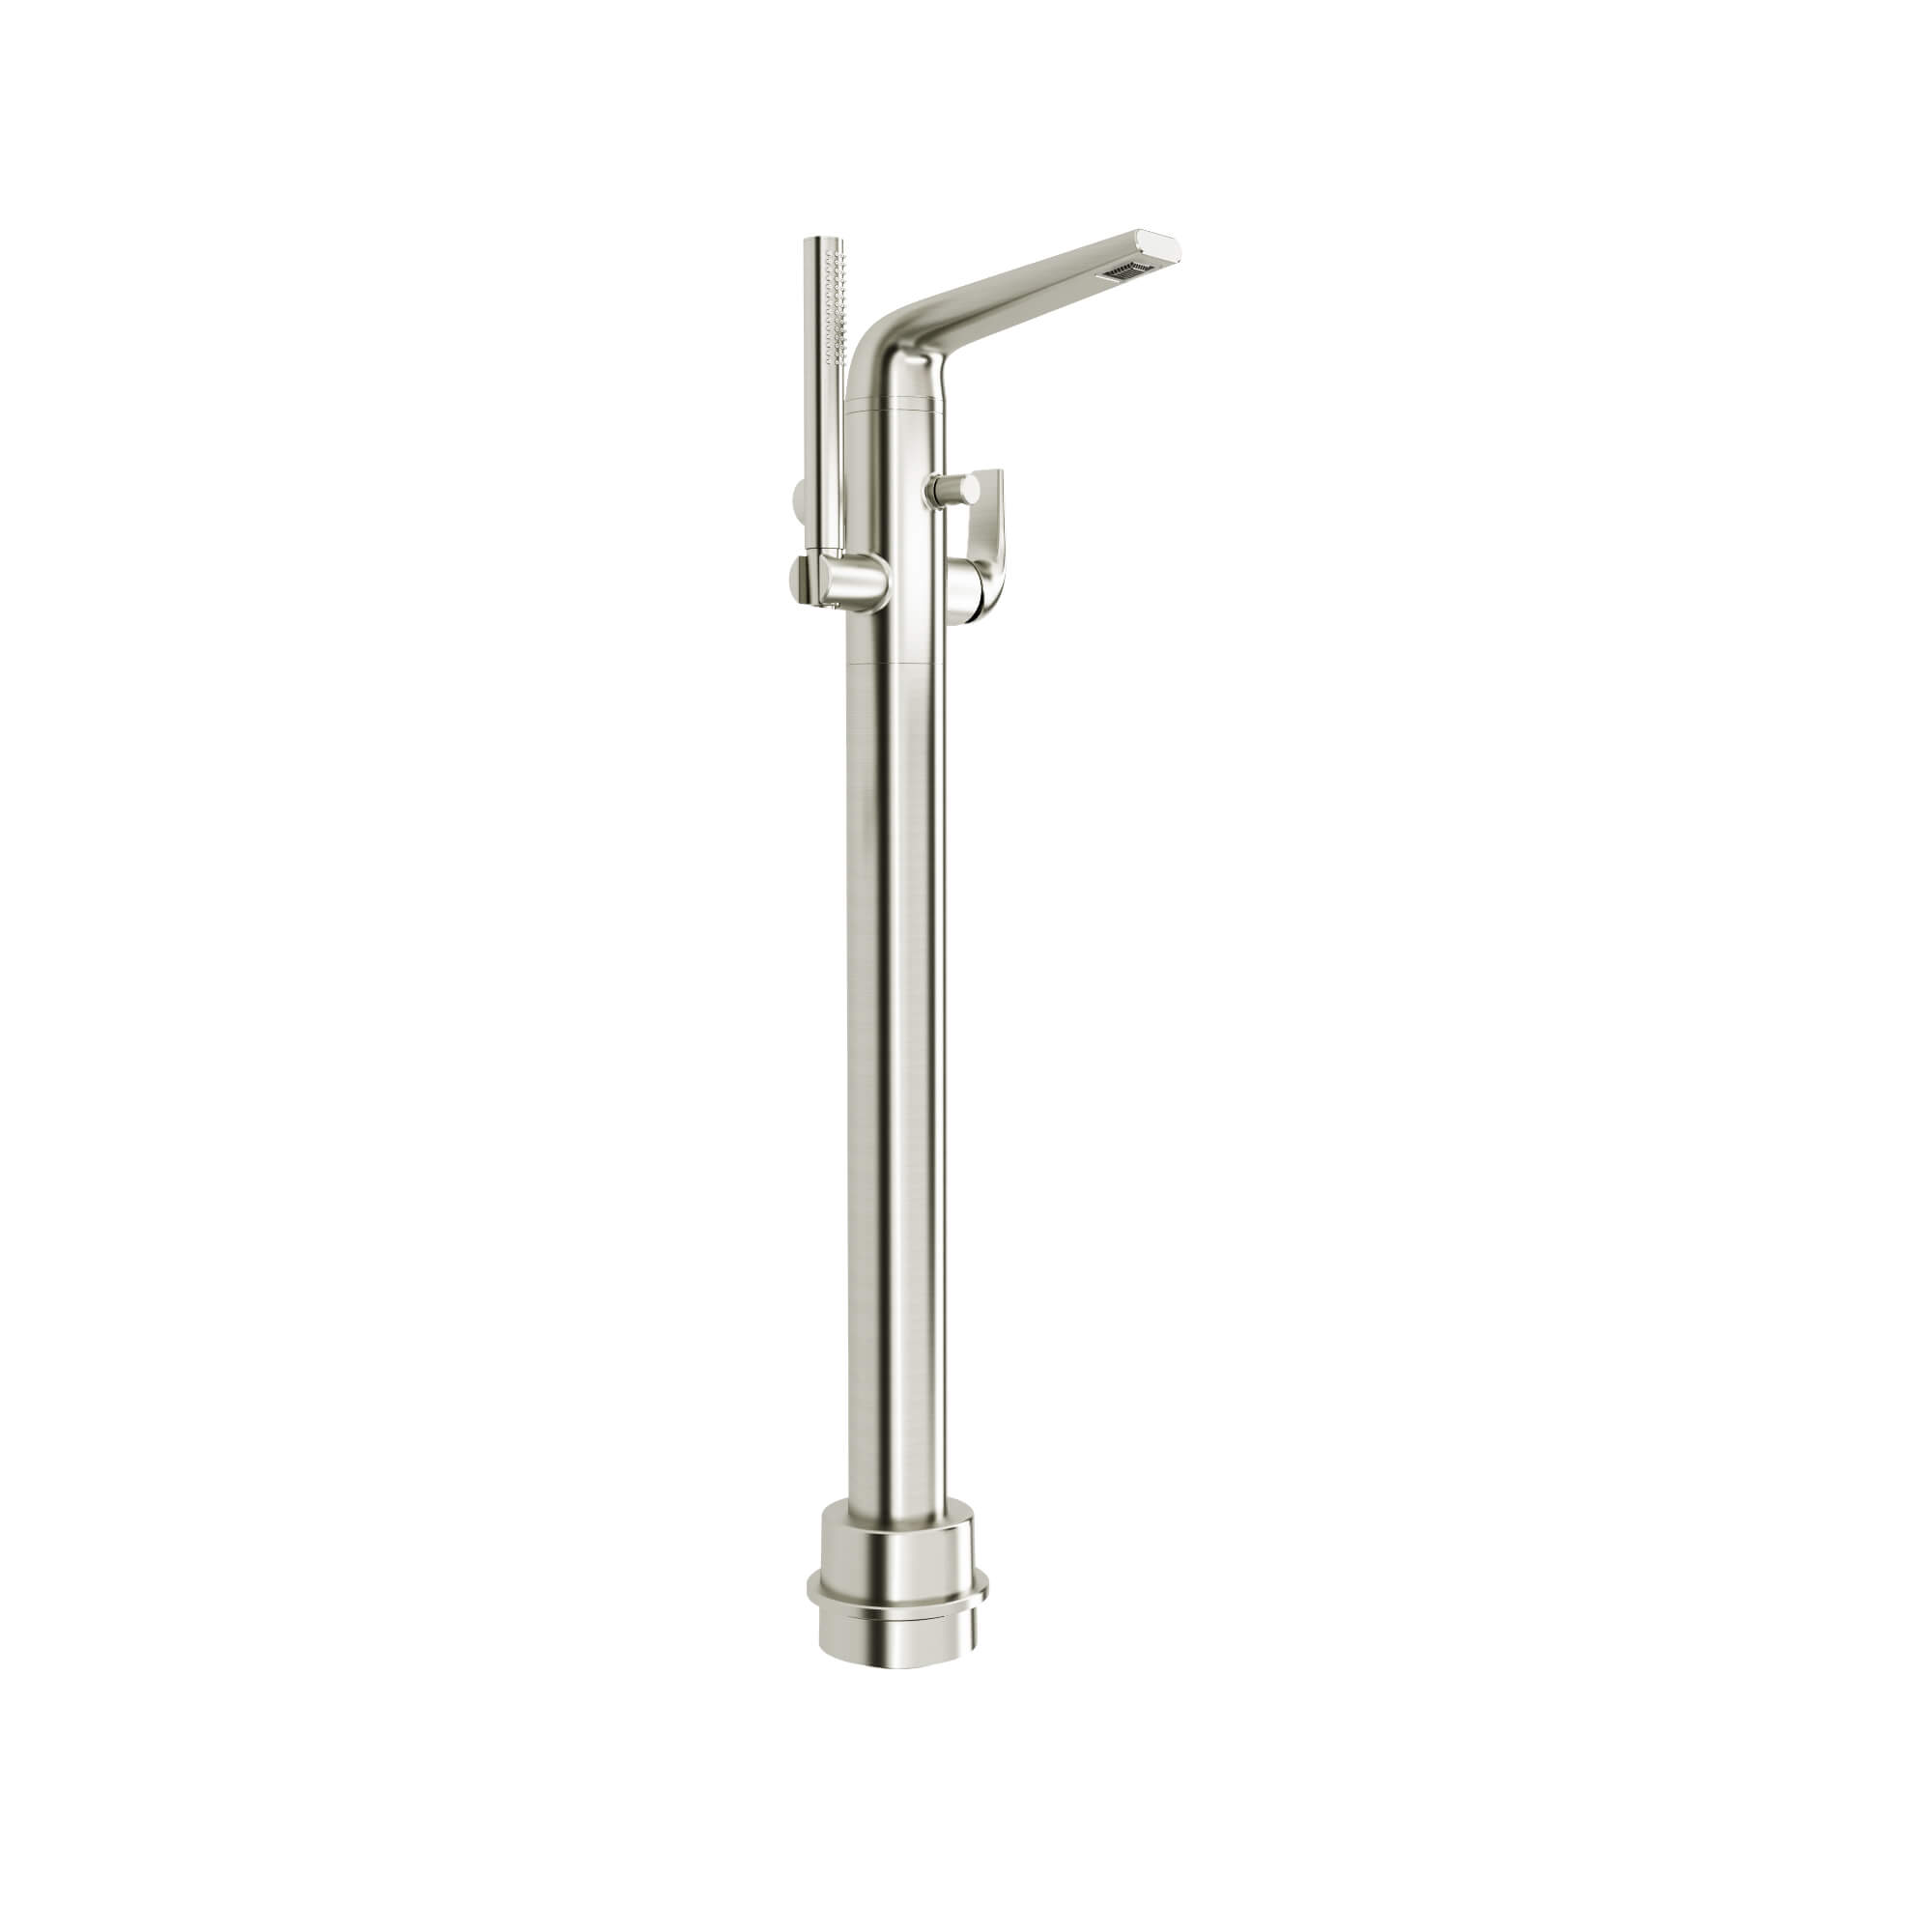 DXV Modulus® Single Handle Floor Mount Bathtub Filler with Hand Shower and Lever Handle